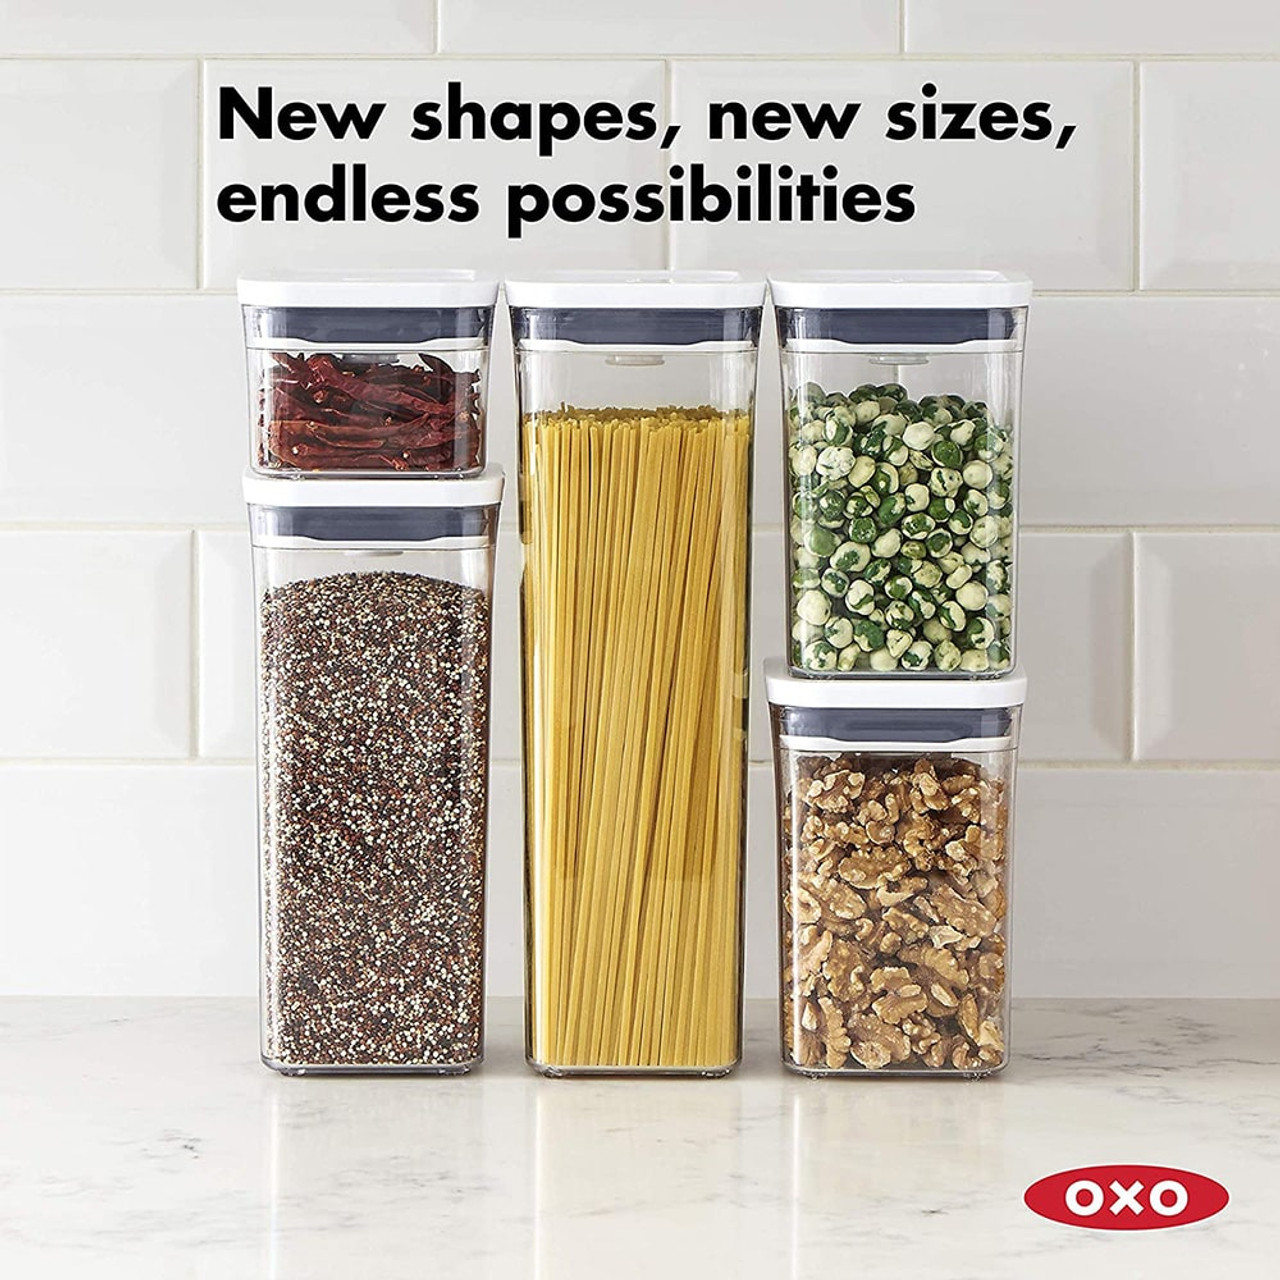 NEW OXO Good Grips POP Container - Airtight Food Storage - 0.4 Qt